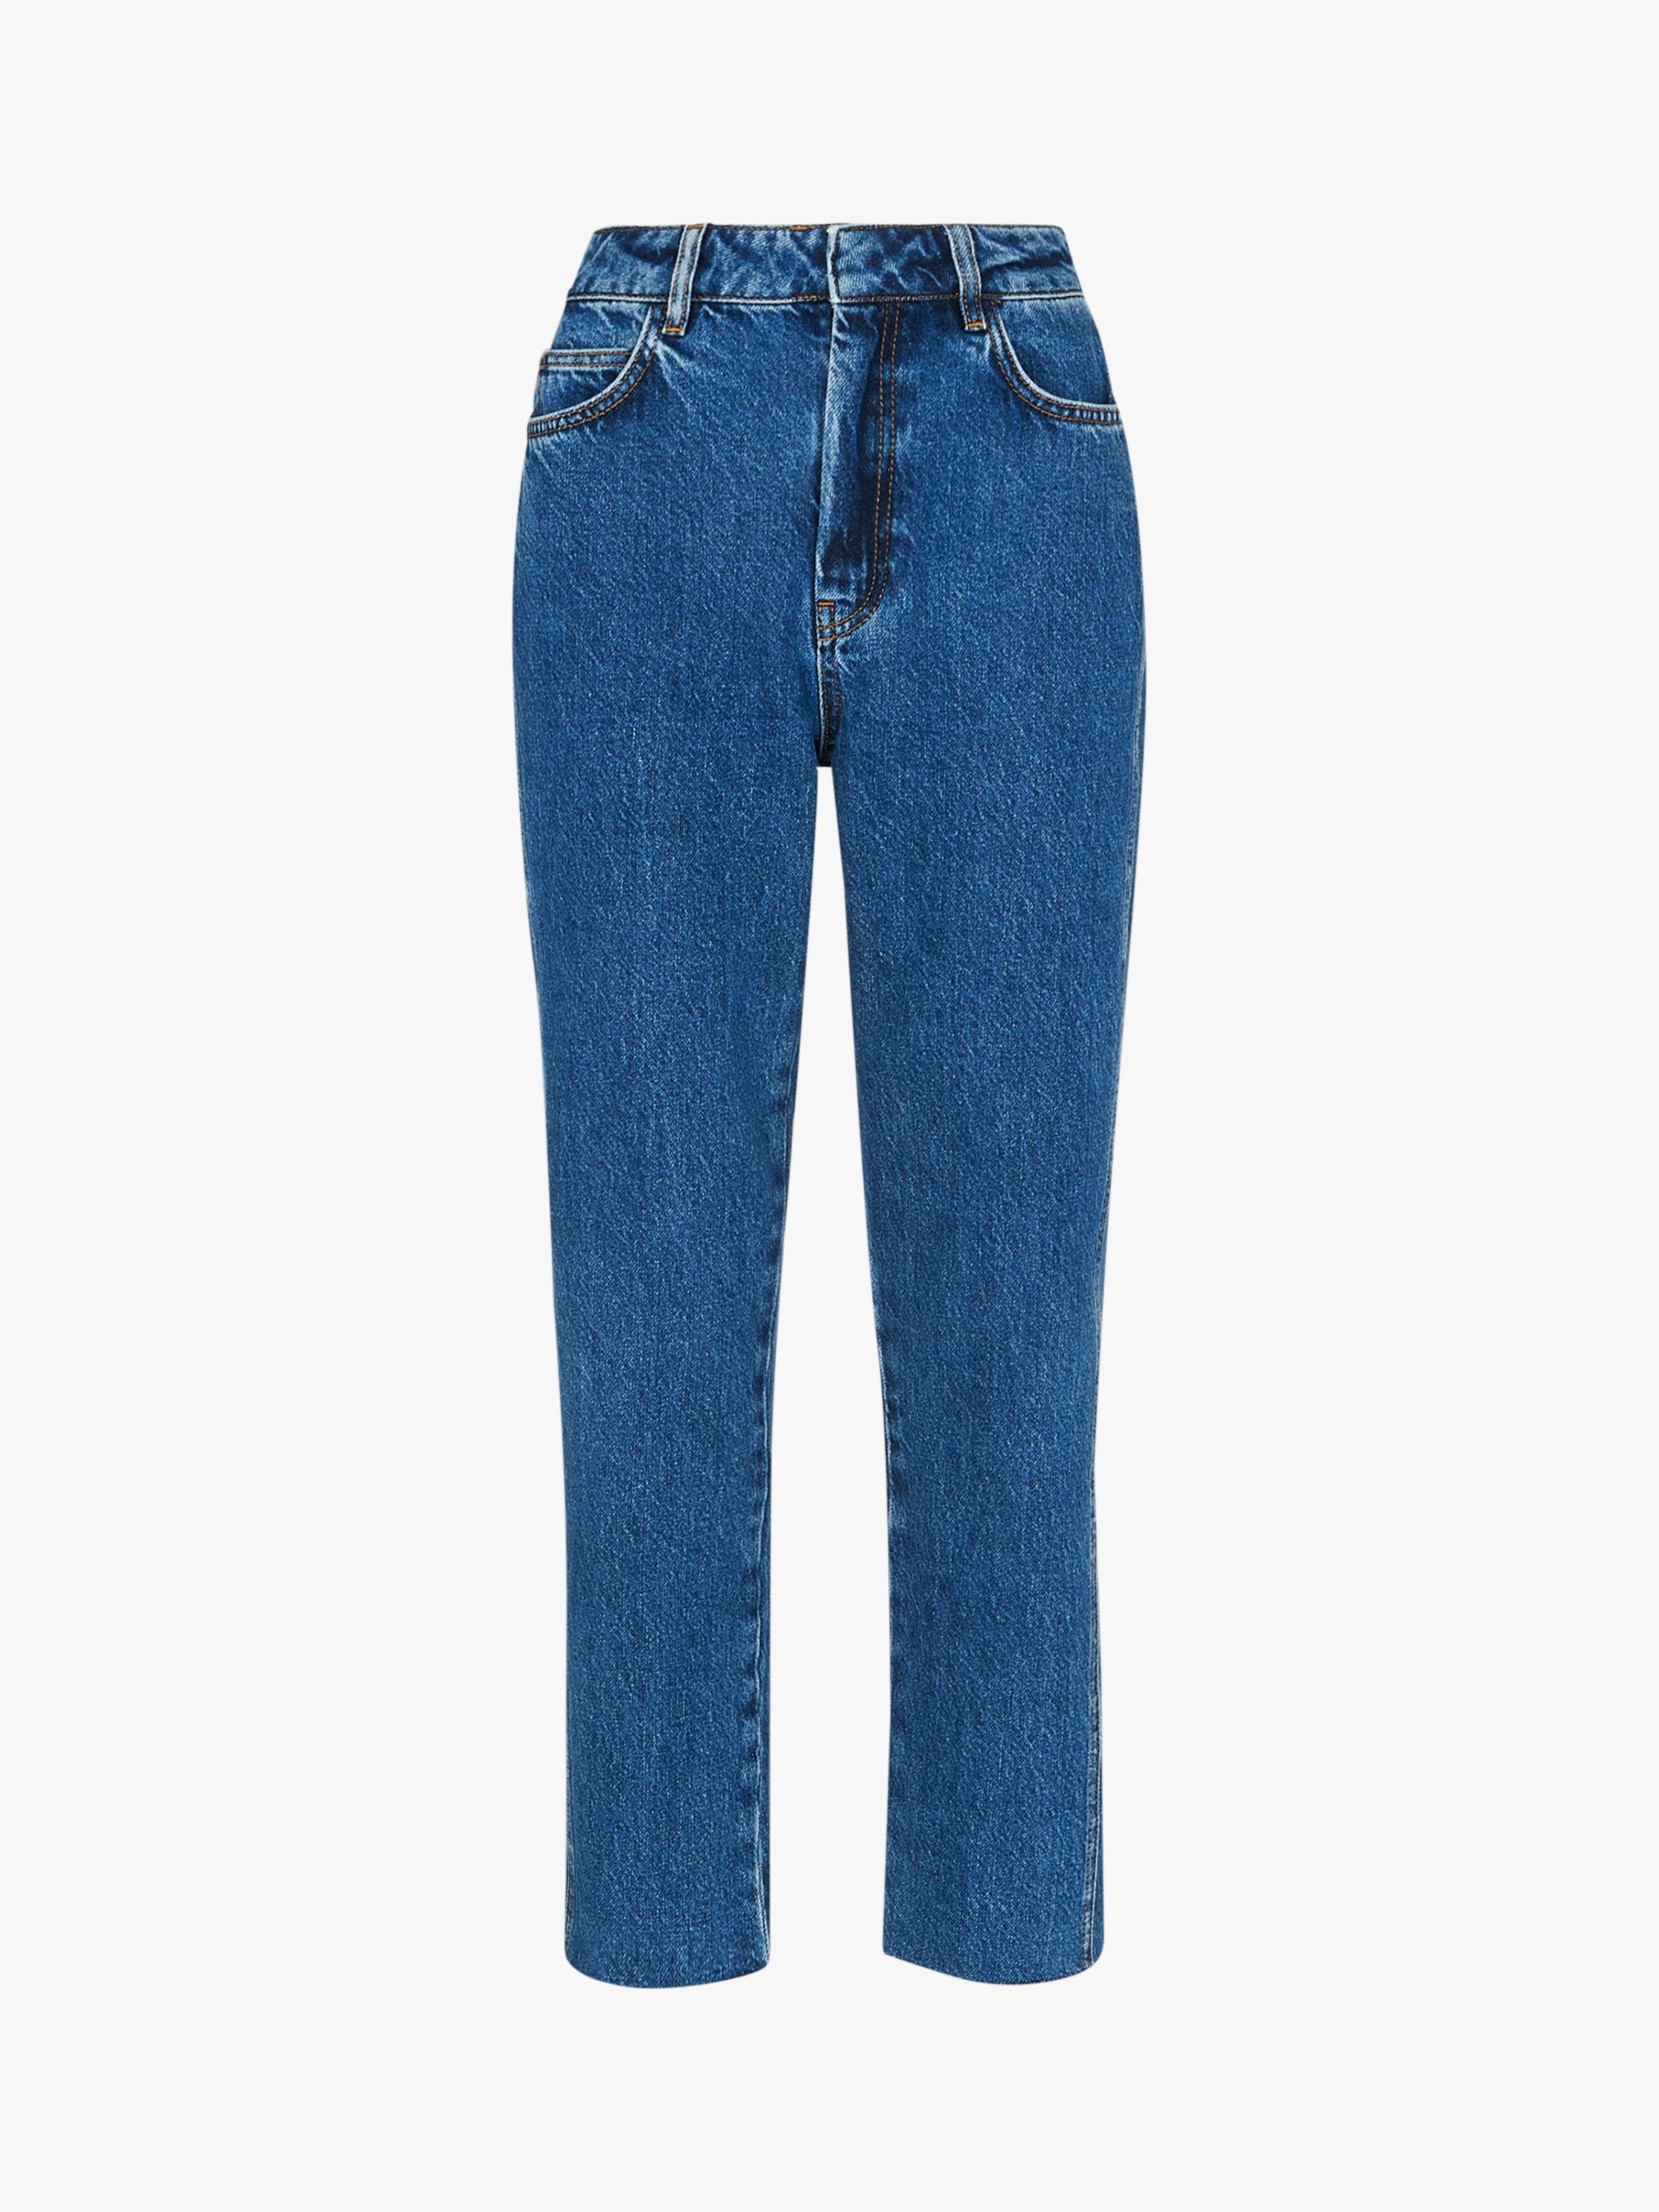 Buy Whistles Authentic Slim Leg Frayed Jeans Online at johnlewis.com